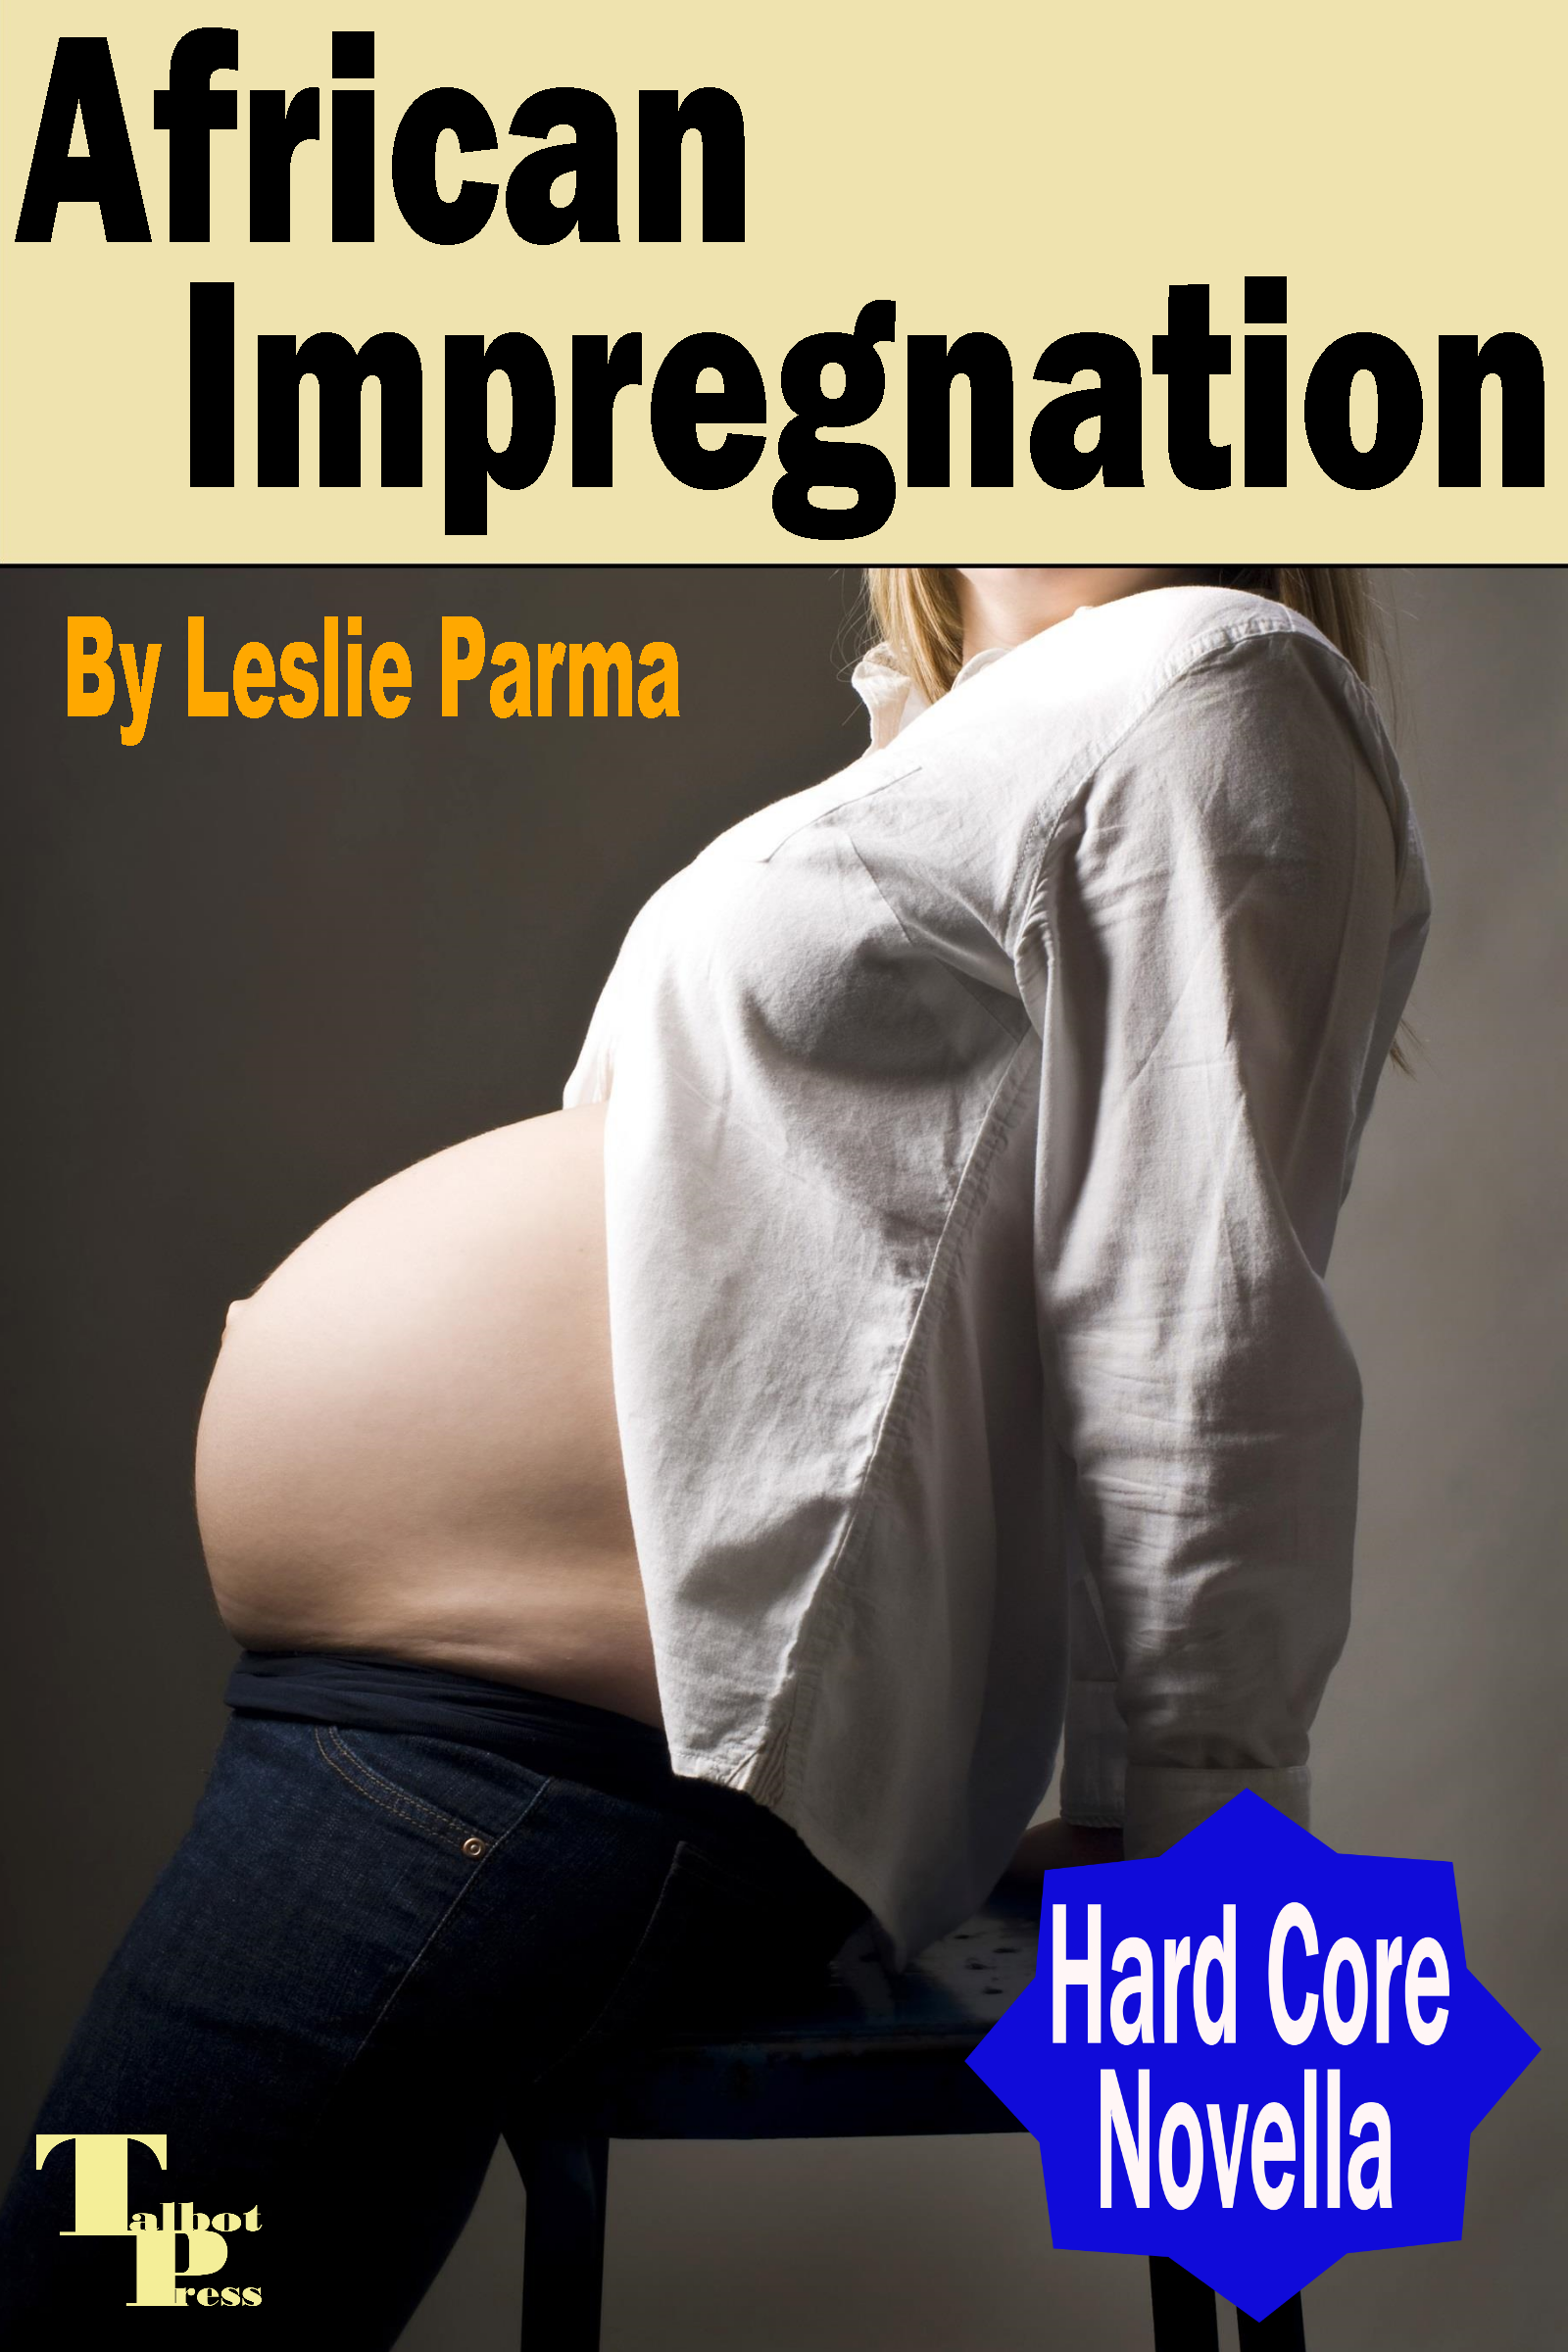 Before And After Interracial Impregnation - African Impregnation, an Ebook by Leslie Parma